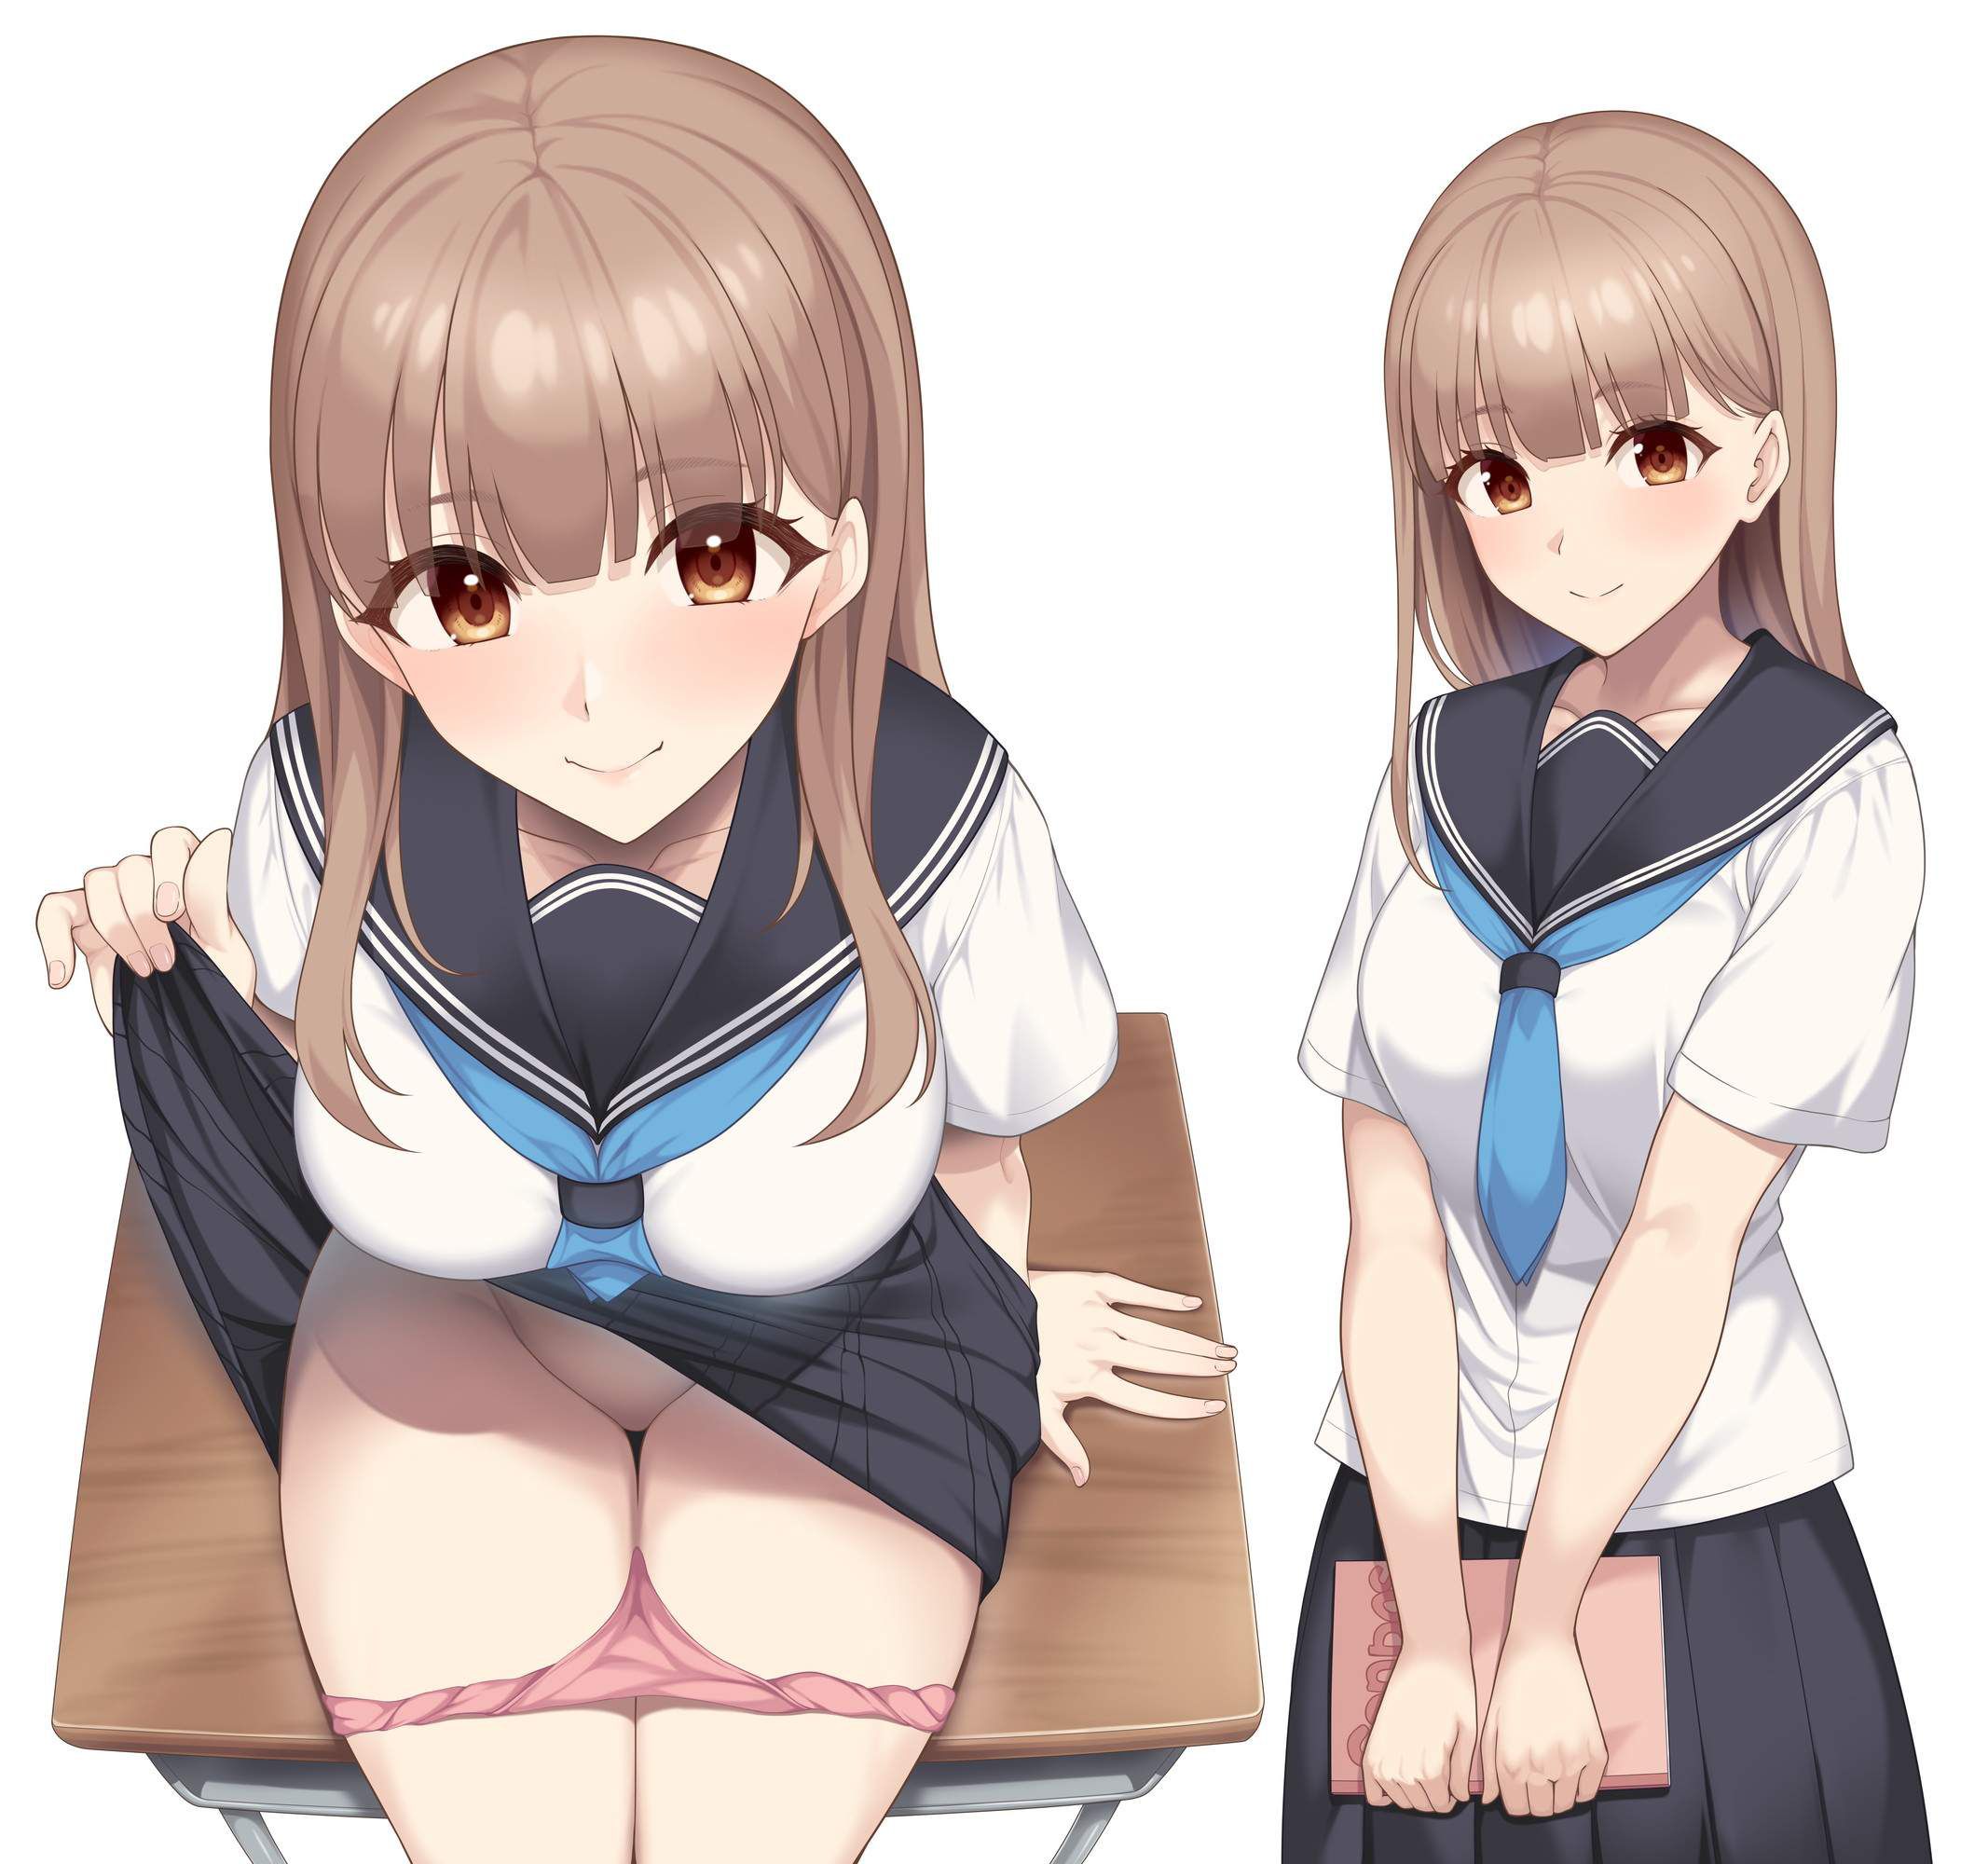 Cute two-dimensional images of uniforms. 13